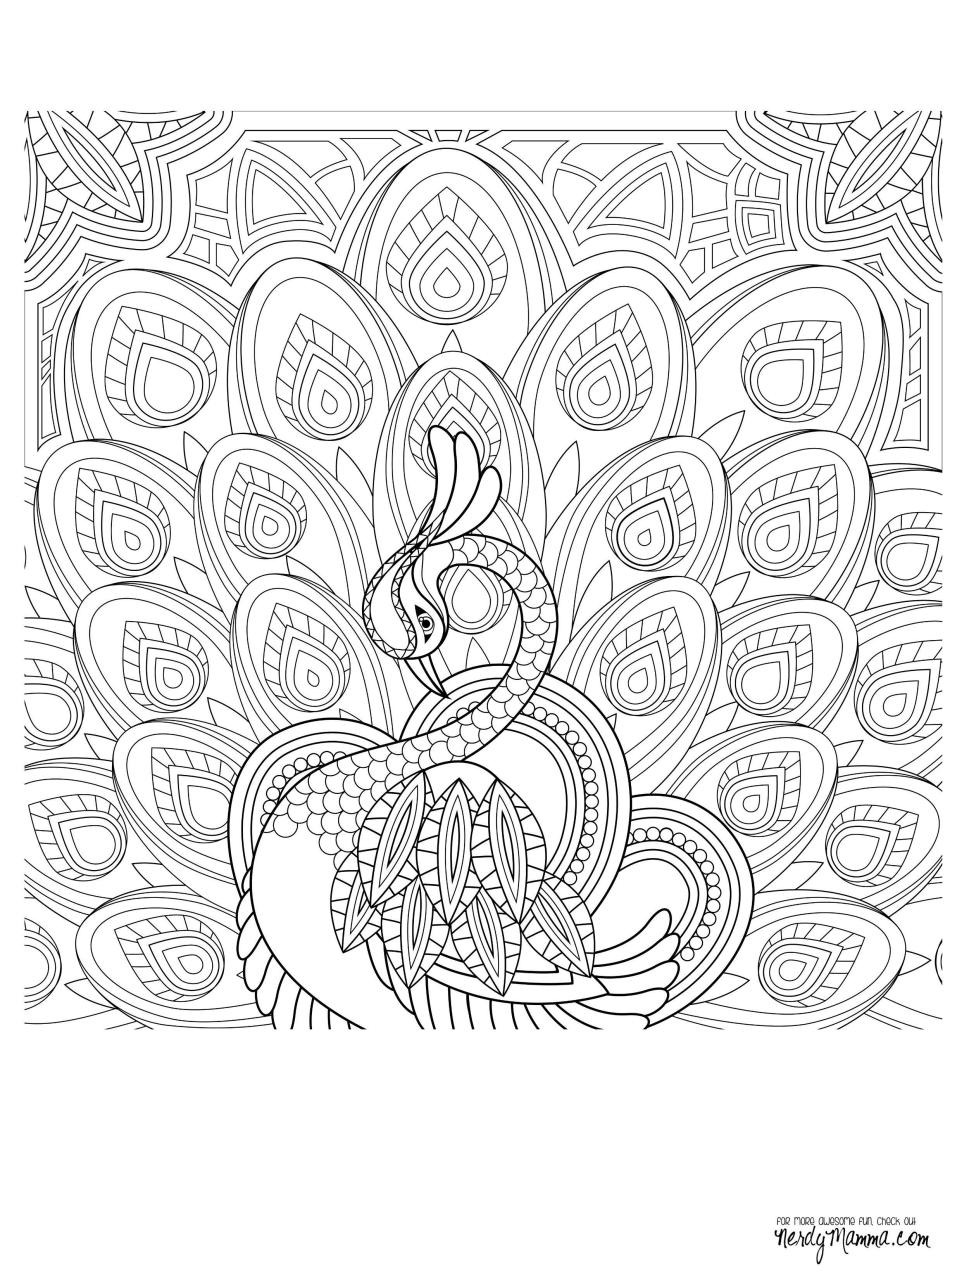 Simple Elephant Mandala Coloring Pages